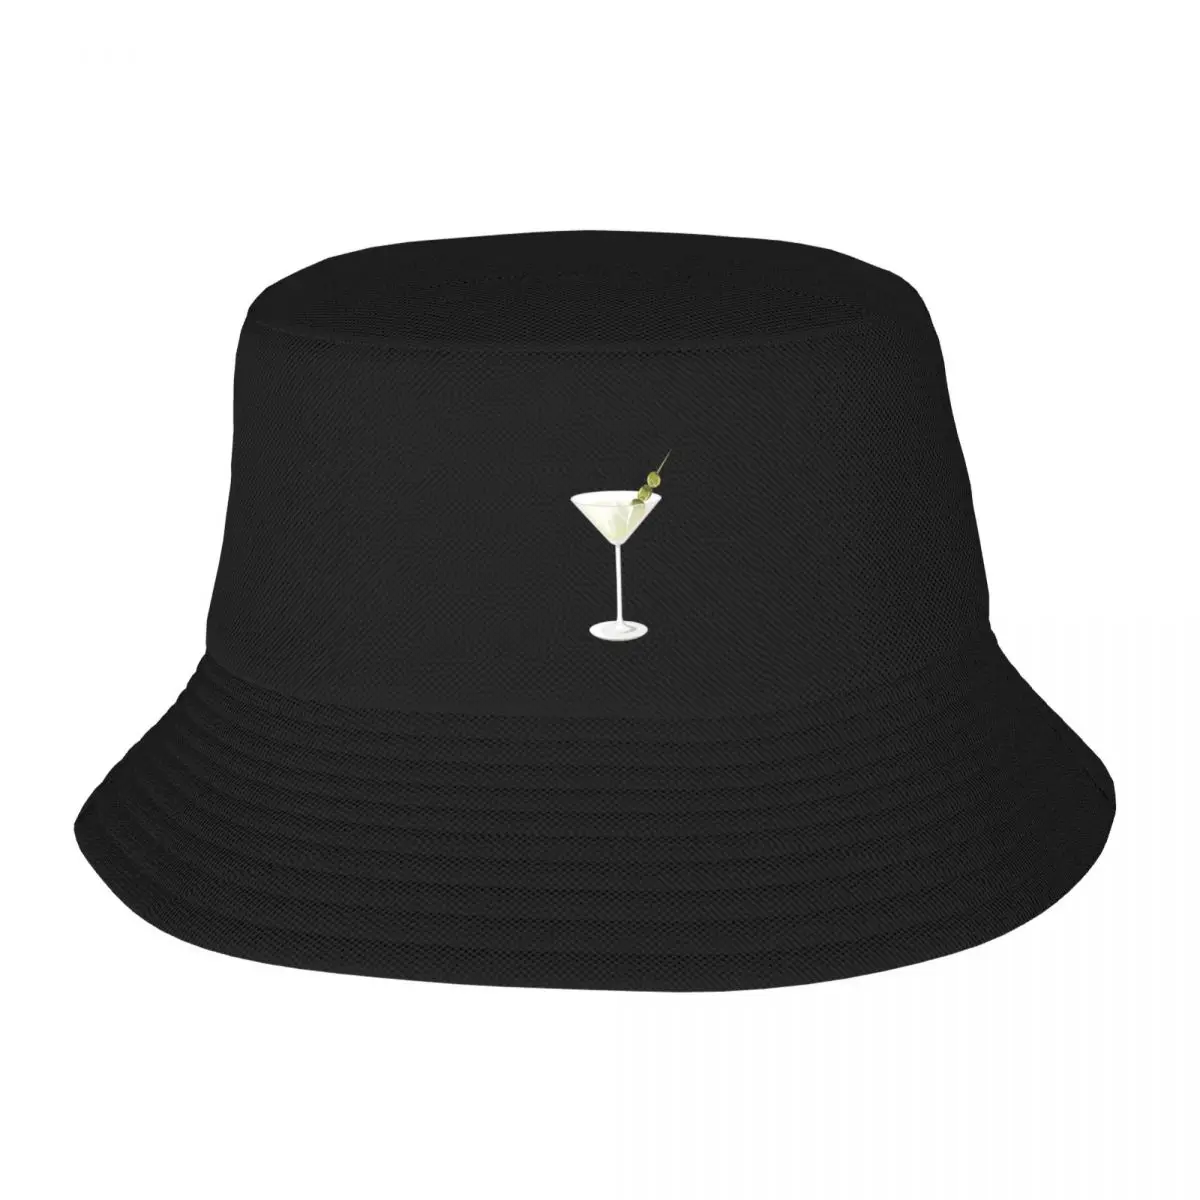 Dry Martini Cocktail Bucket Hat Golf Hat derby hat Military Cap